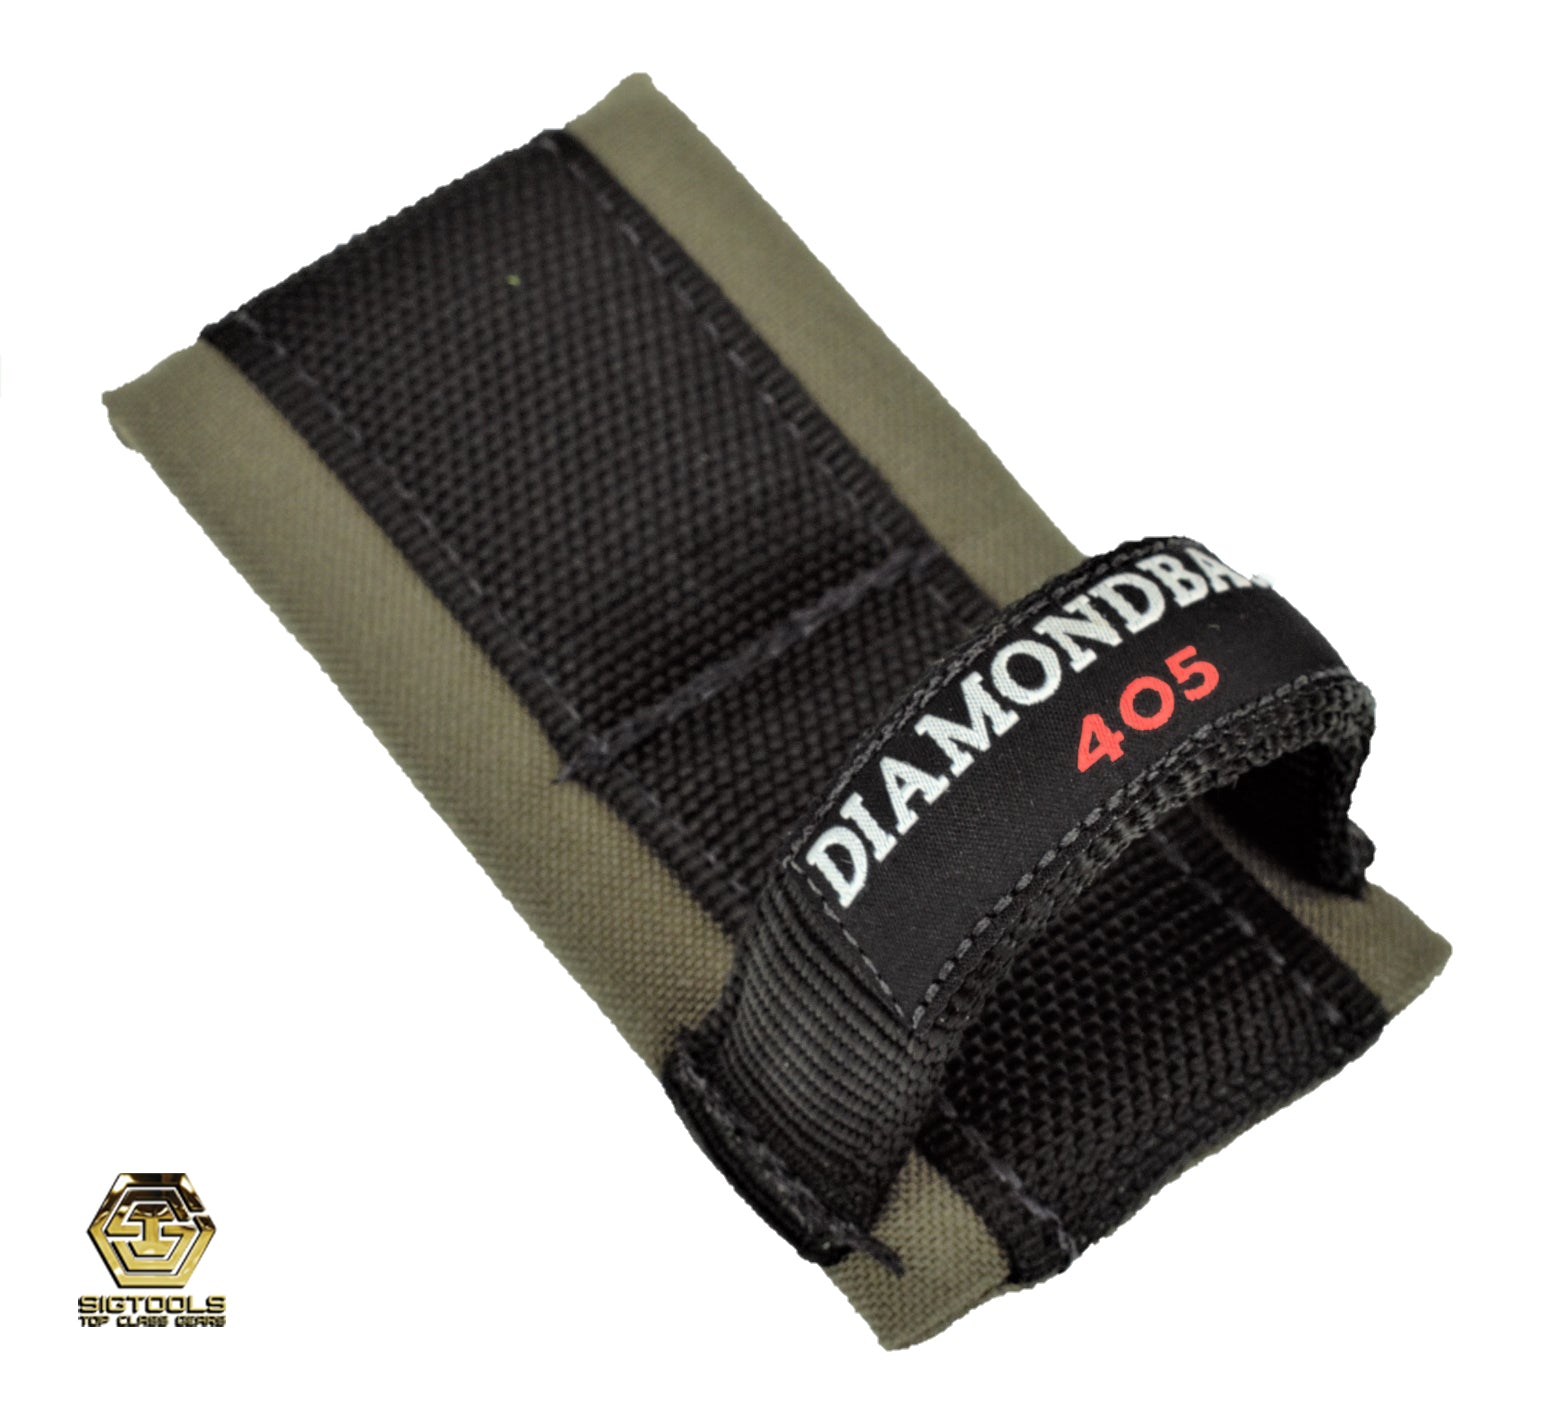 "Diamondback Lo-Rider Hammer Loop in Ranger Green - Silent and Efficient Carry Accessory"